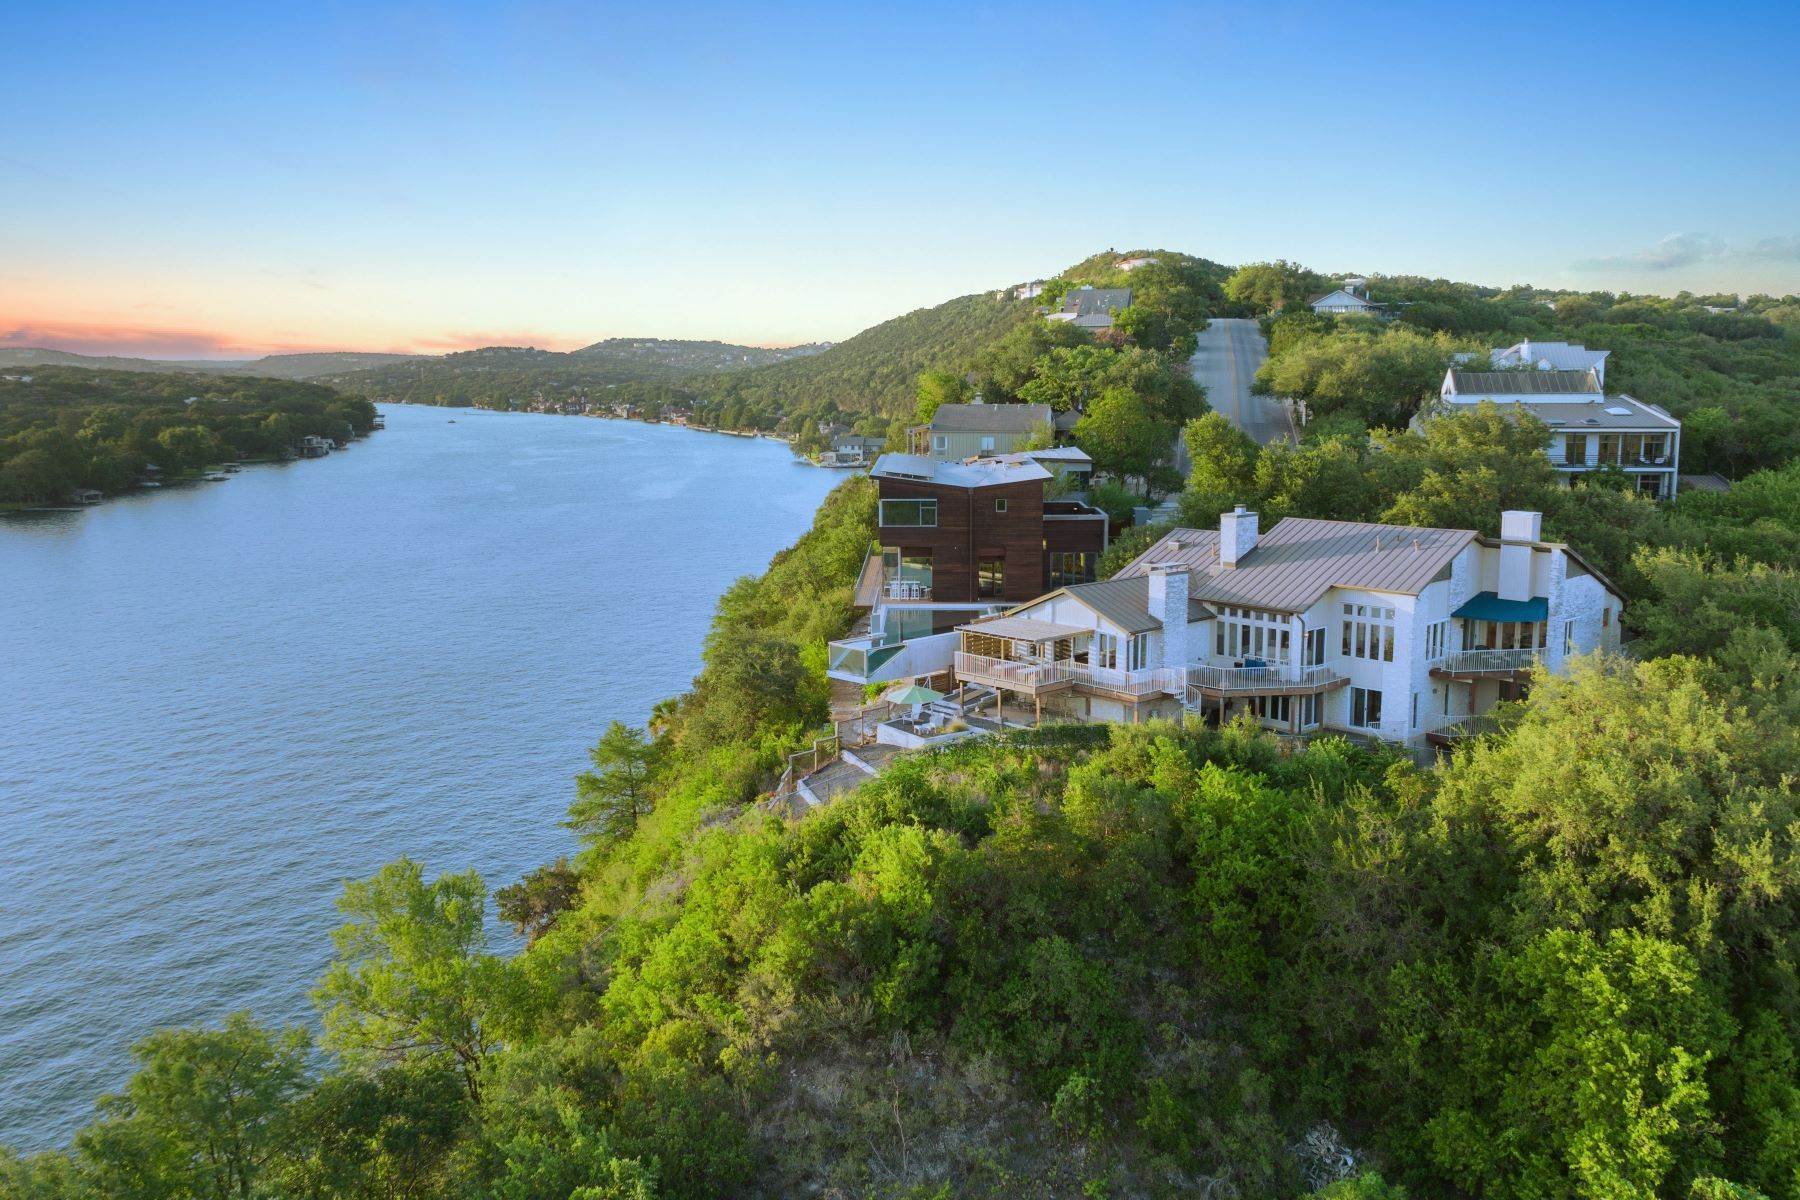 Property for Sale at Hilltop on Lake Austin 3400 Mount Bonnell Road Austin, Texas 78731 United States